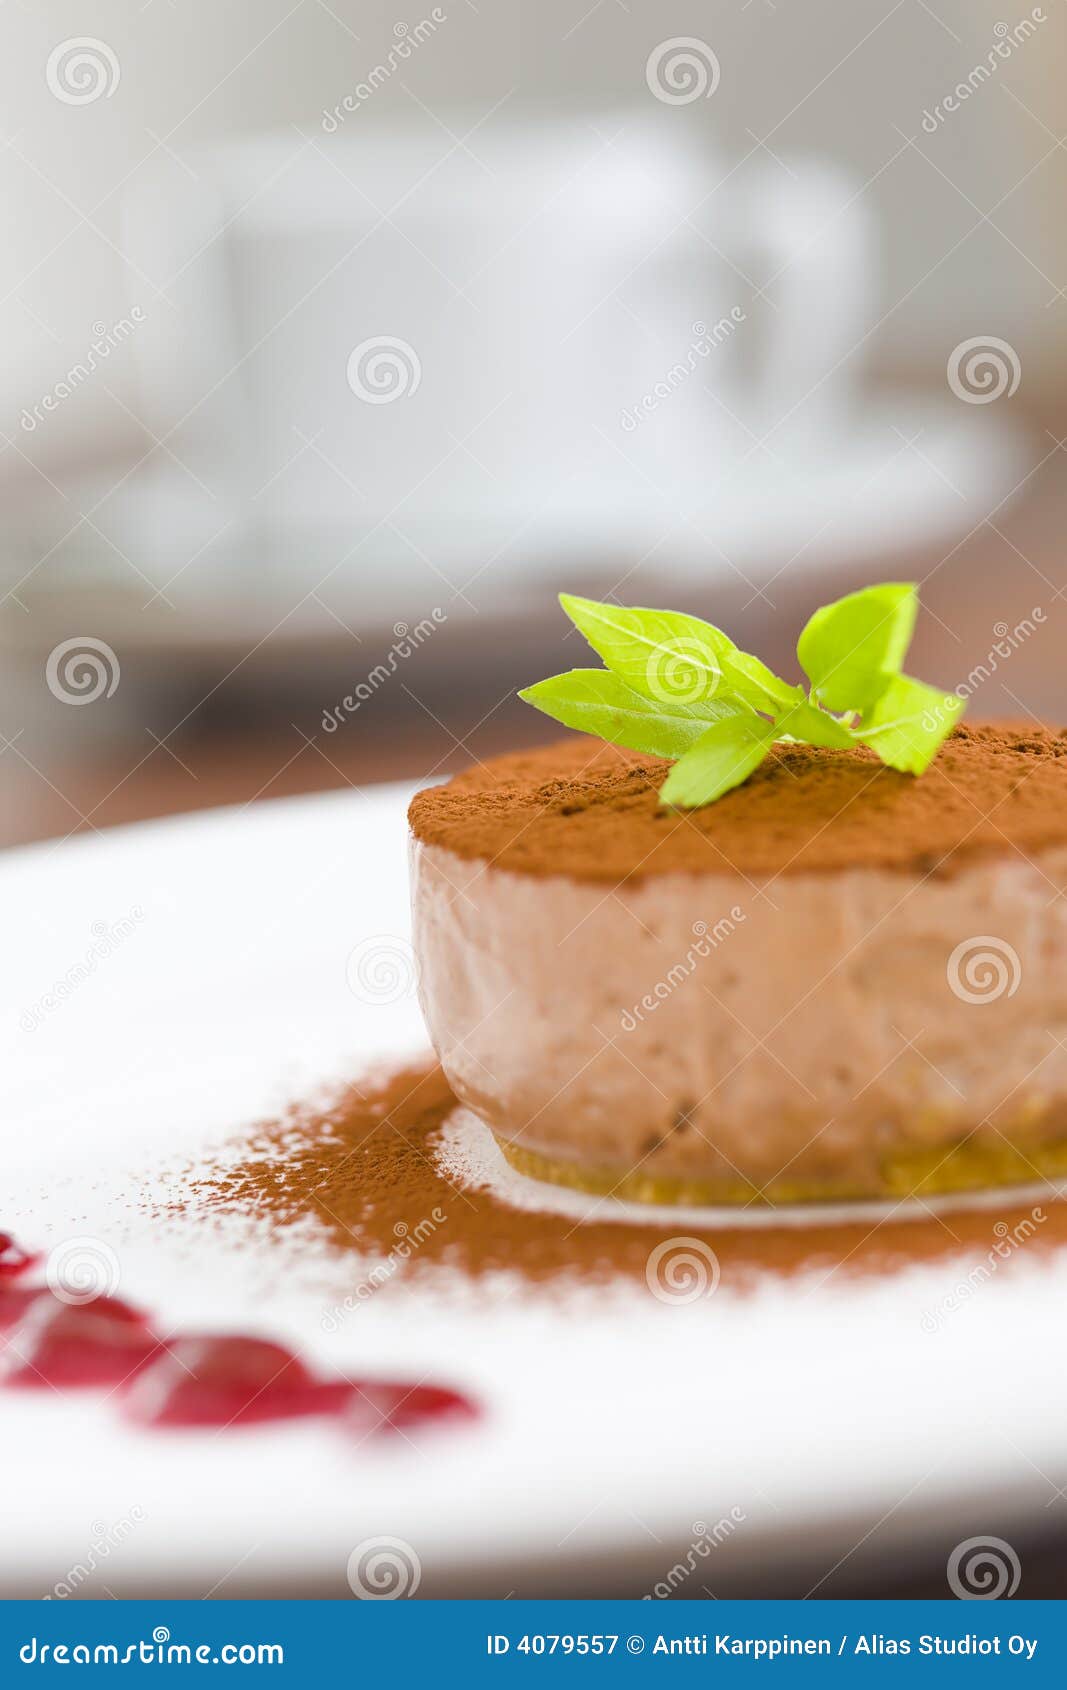 mocca cheese cake